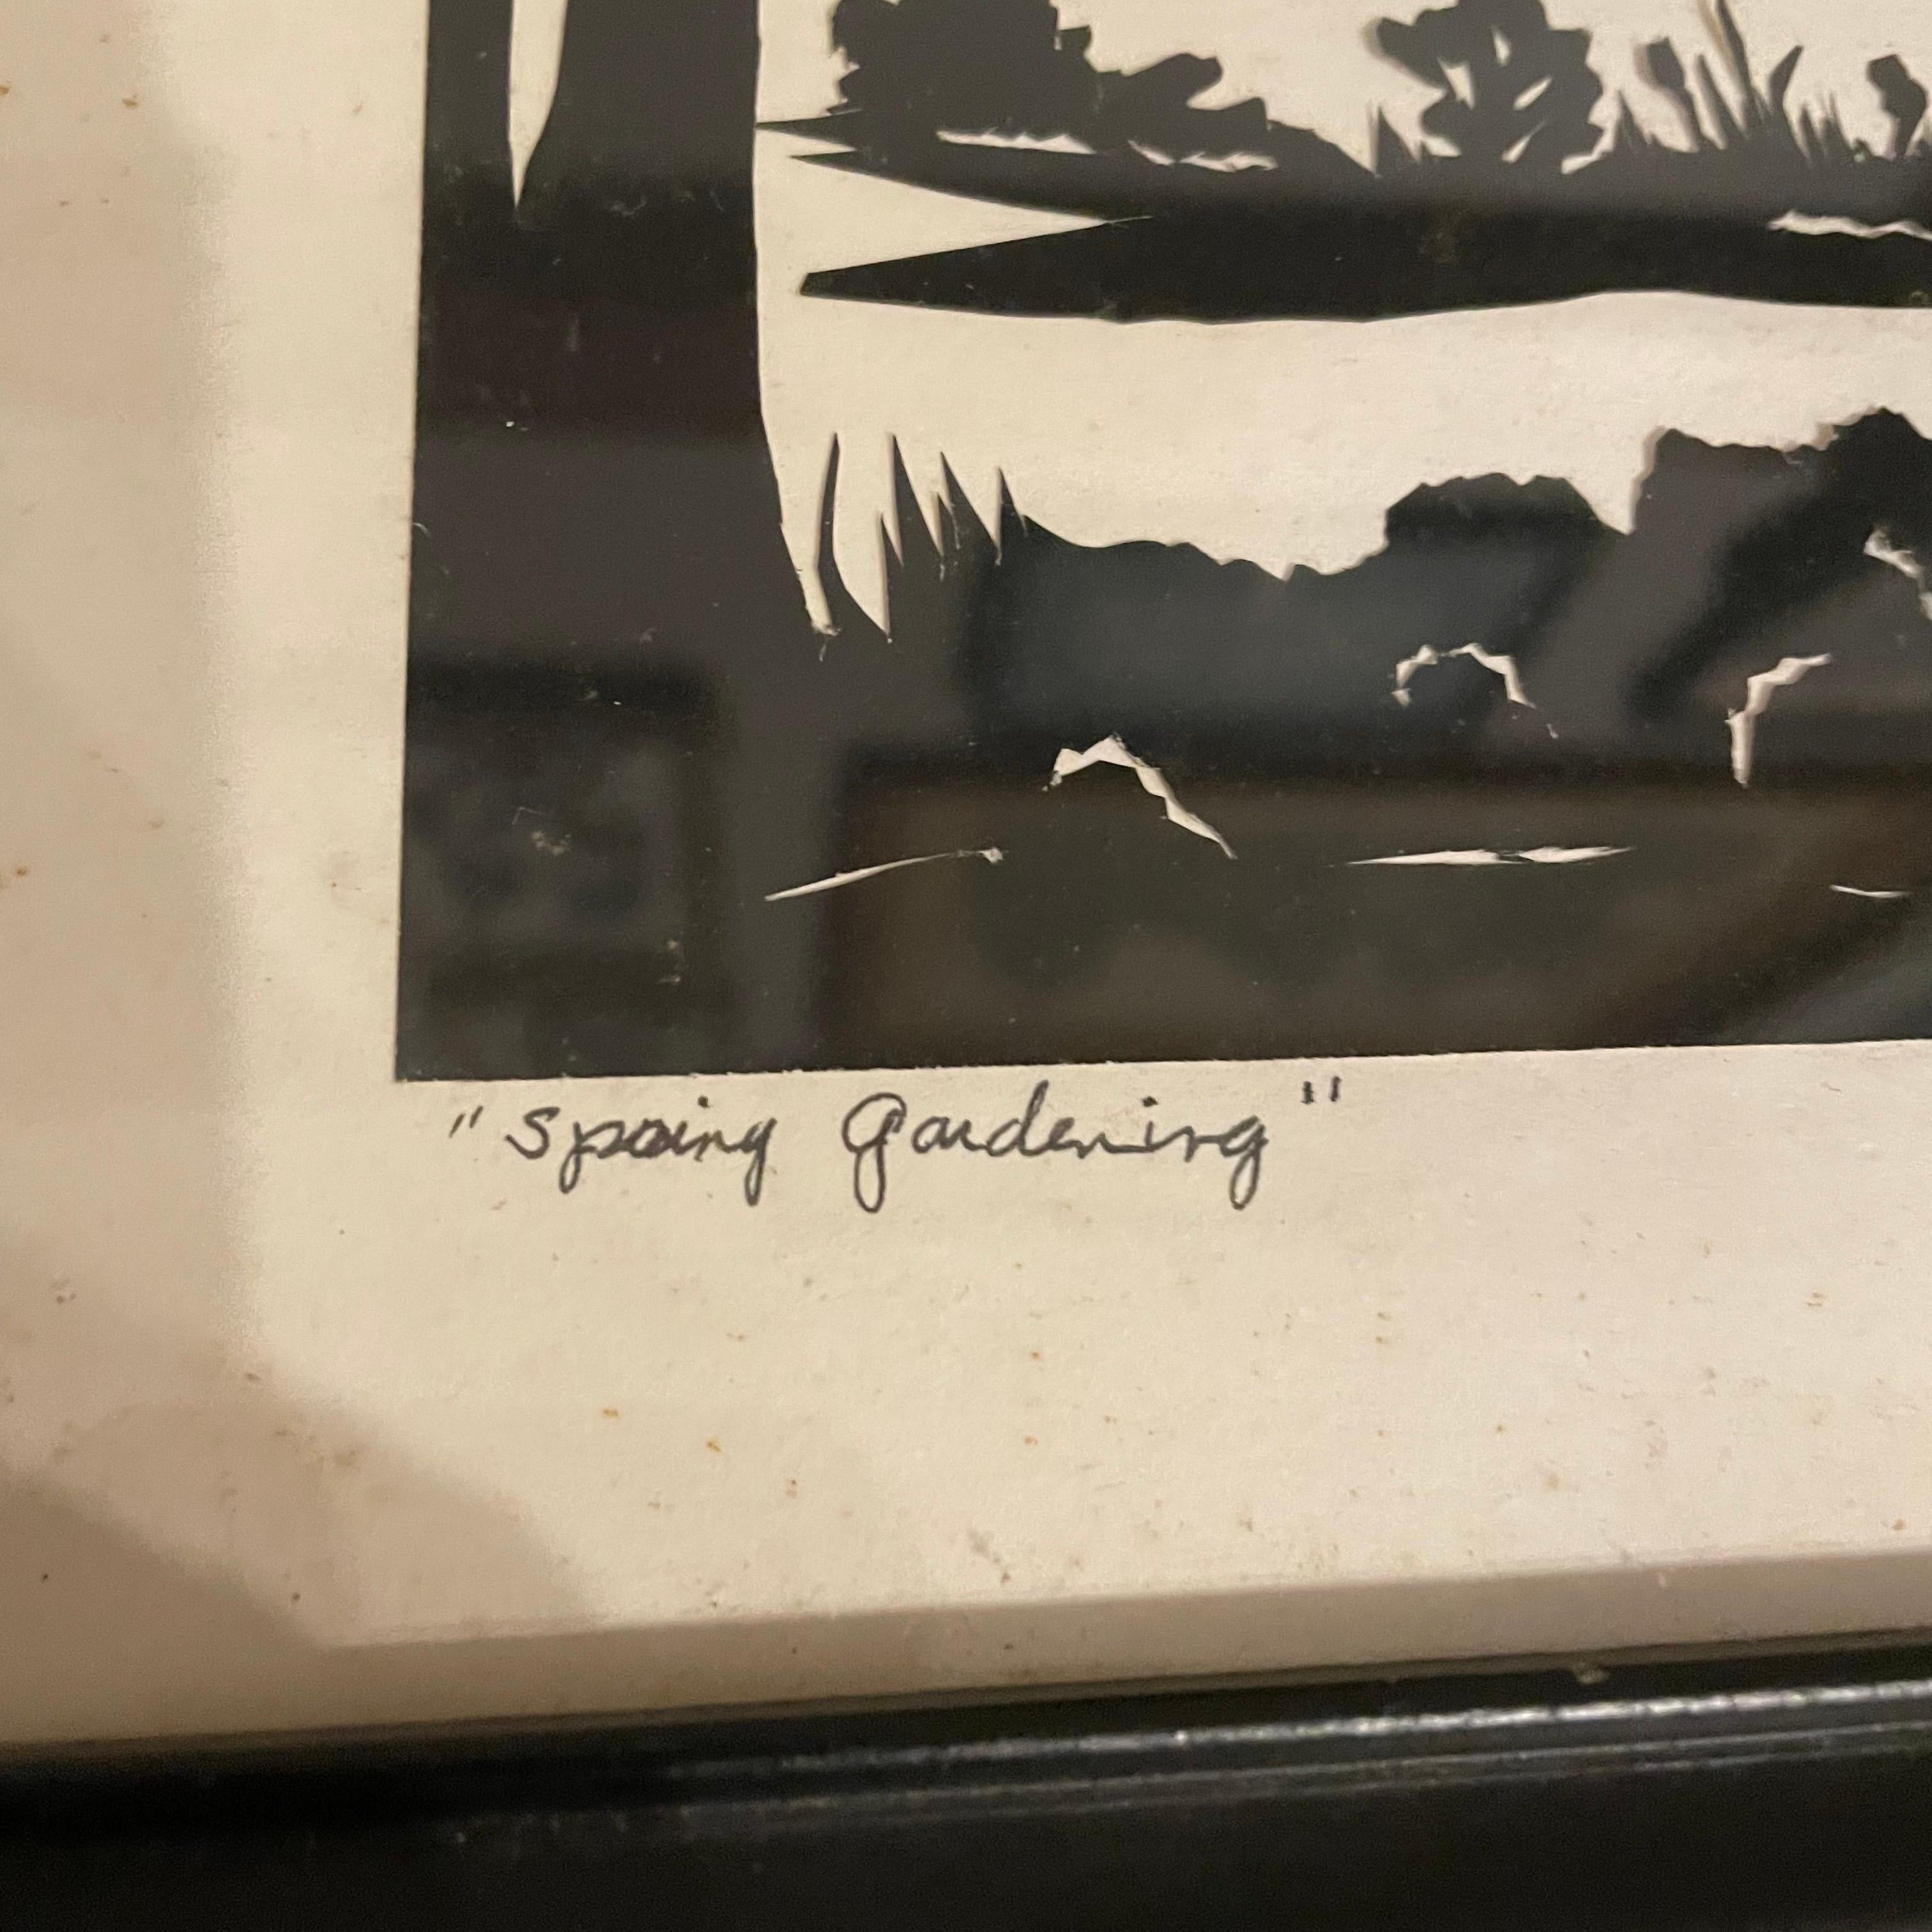 A genuine hand cut silhouette of a woman gardening. There is foxing on the white background of the piece. This can possibly be replaced or leave it as is. Could use a new frame as there are some dings on it. All of these issues are pictured.